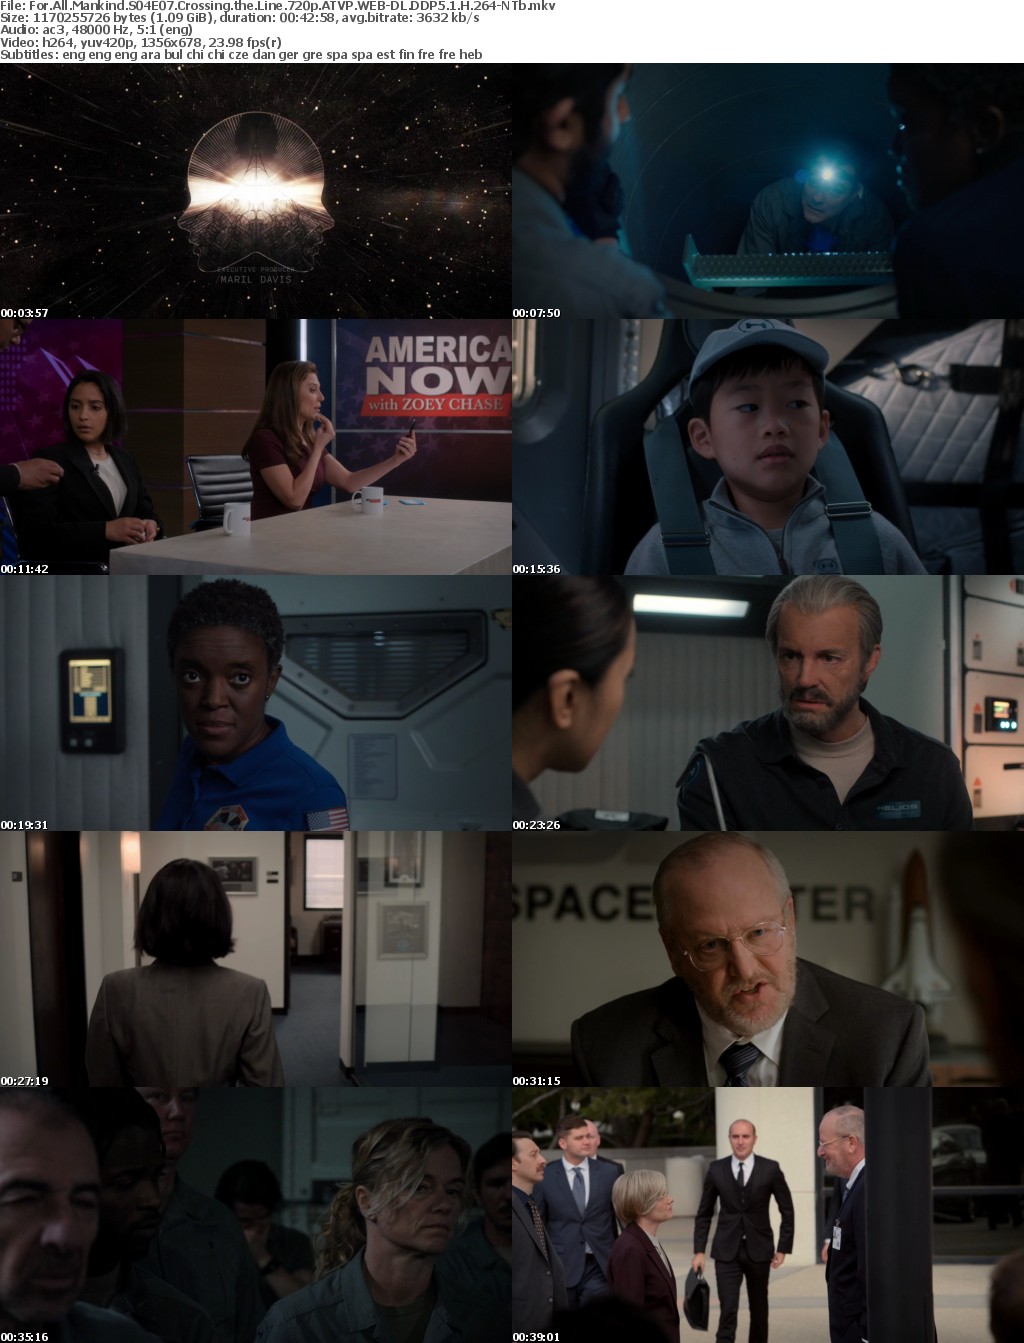 For All Mankind S04E07 Crossing the Line 720p ATVP WEB-DL DDP5 1 H 264-NTb